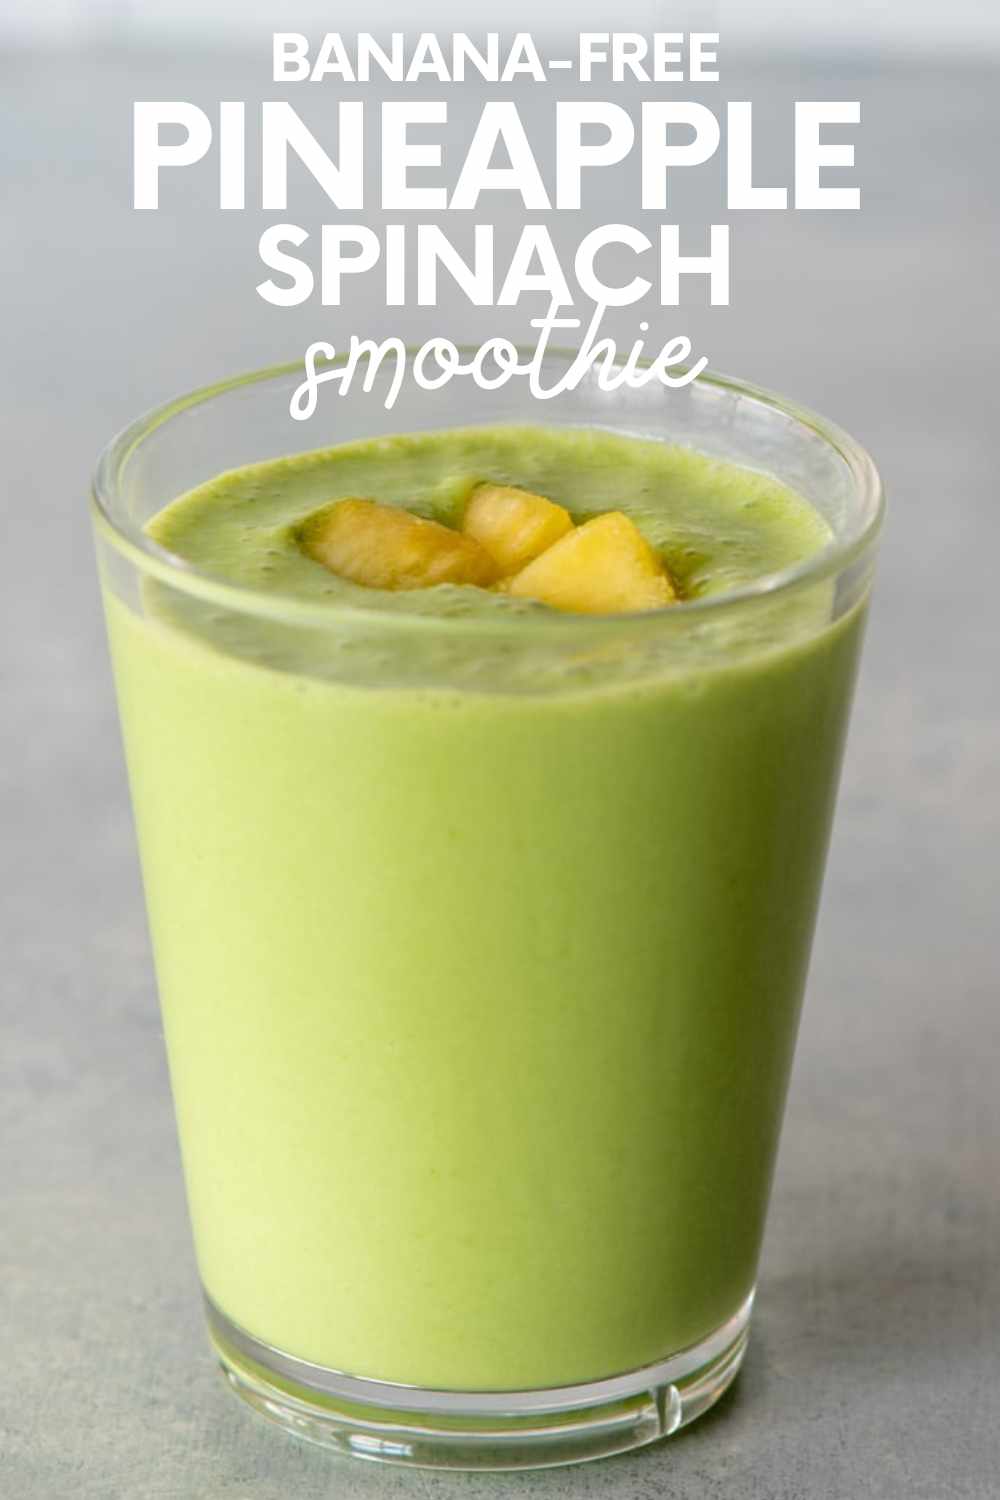 Top view of a pineapple spinach smoothie in a glass with pineapple pieces on top. A text overlay reads, "Banana-Free Pineapple Spinach Smoothie."